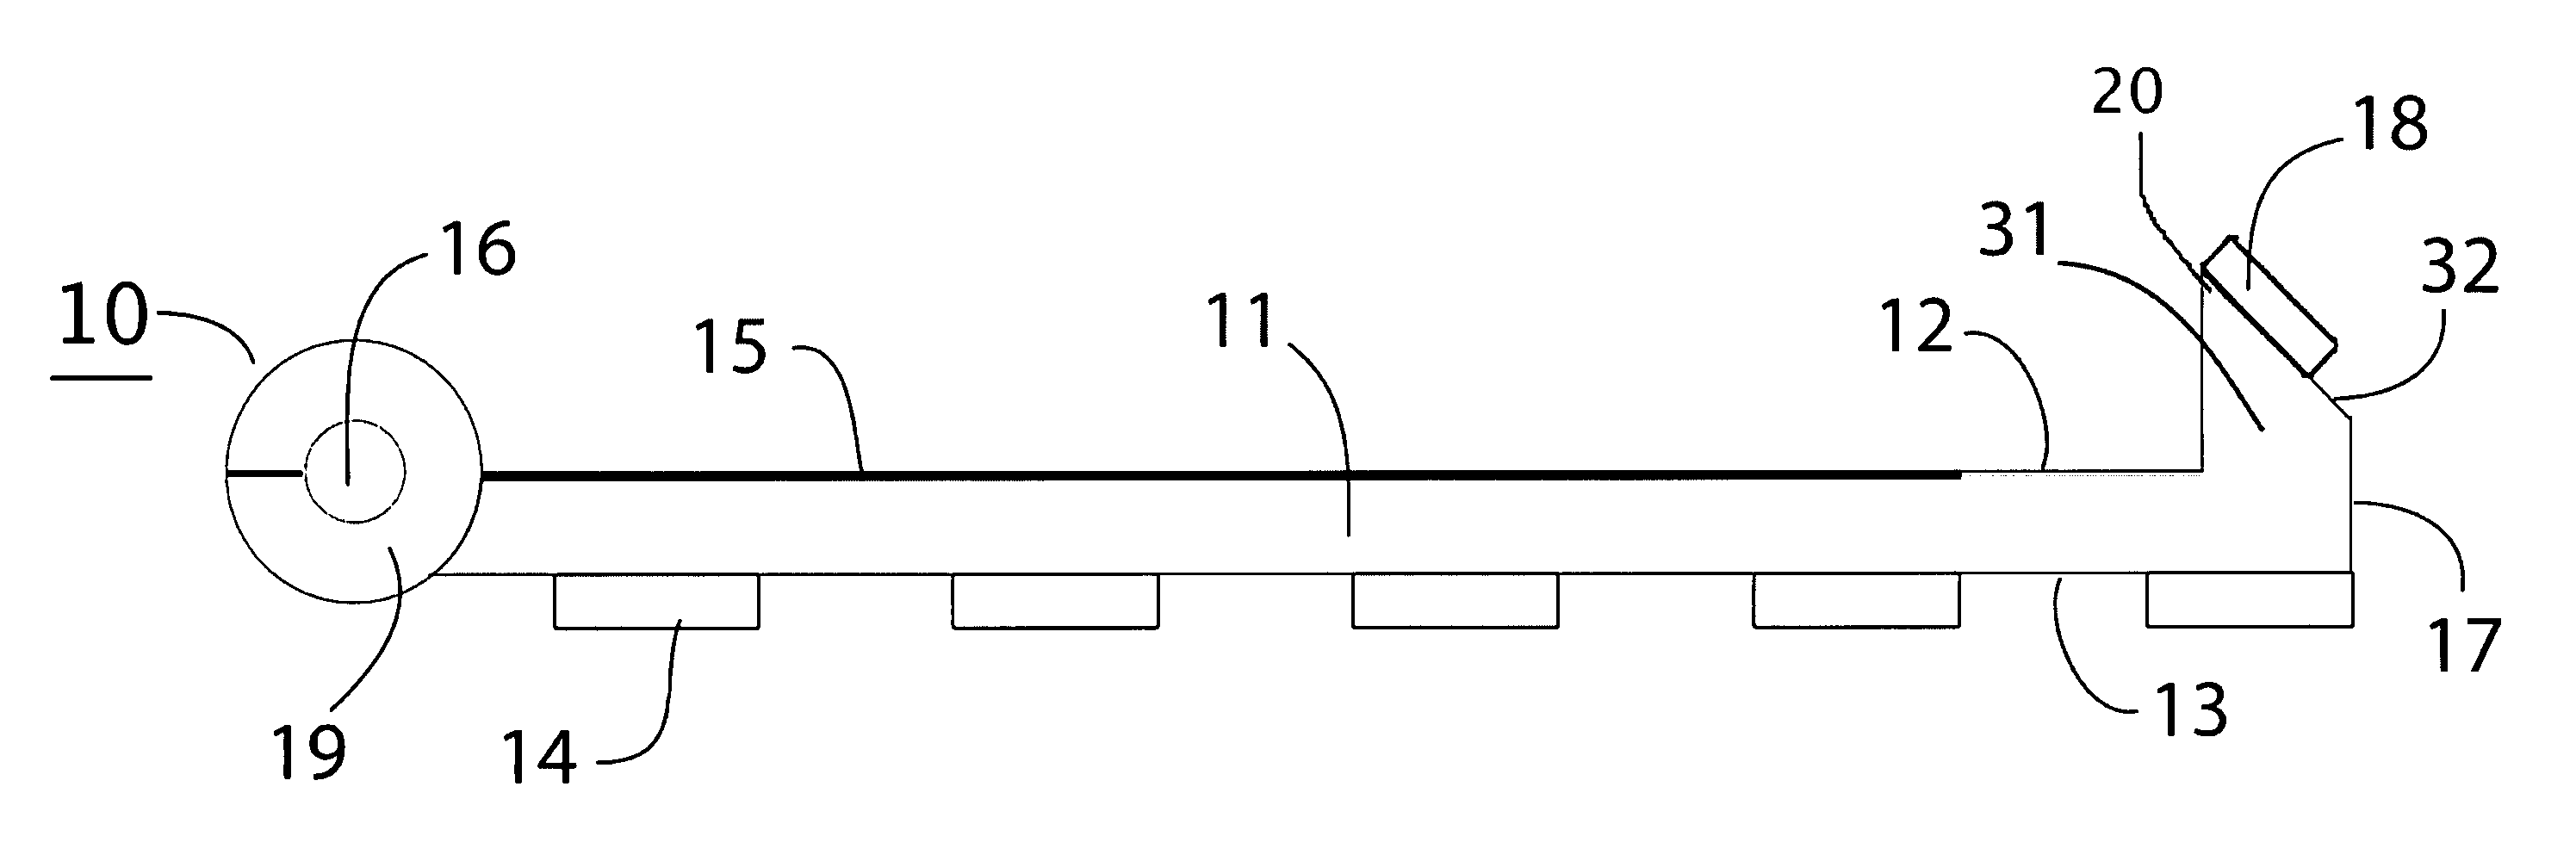 Apparatus for preparing material pieces to be sewn